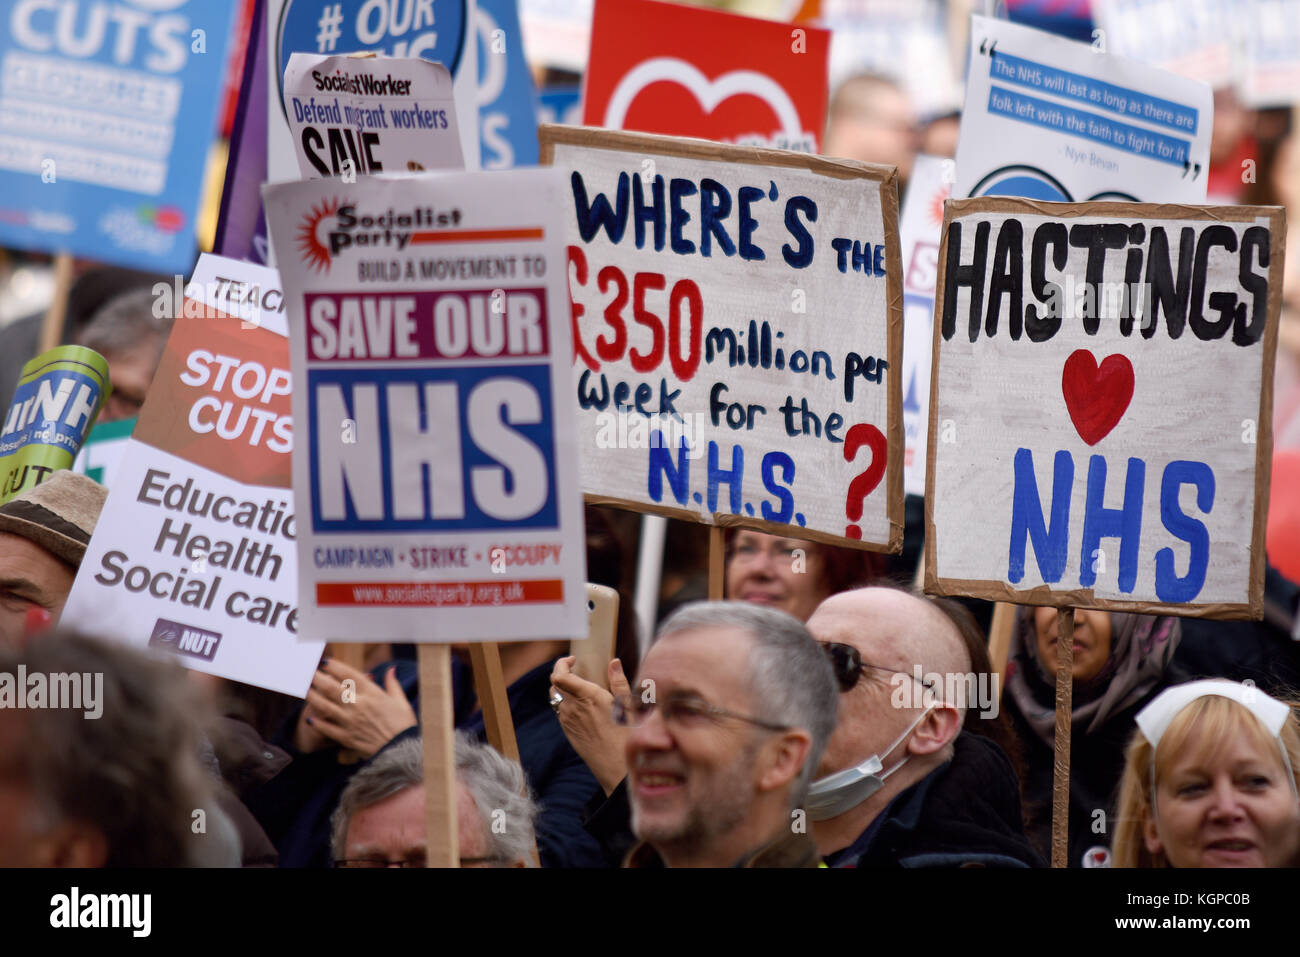 Where is £350 million for NHS during Our NHS protest demonstration rally march against alleged UK Tory Conservative cuts and privatisation plans Stock Photo